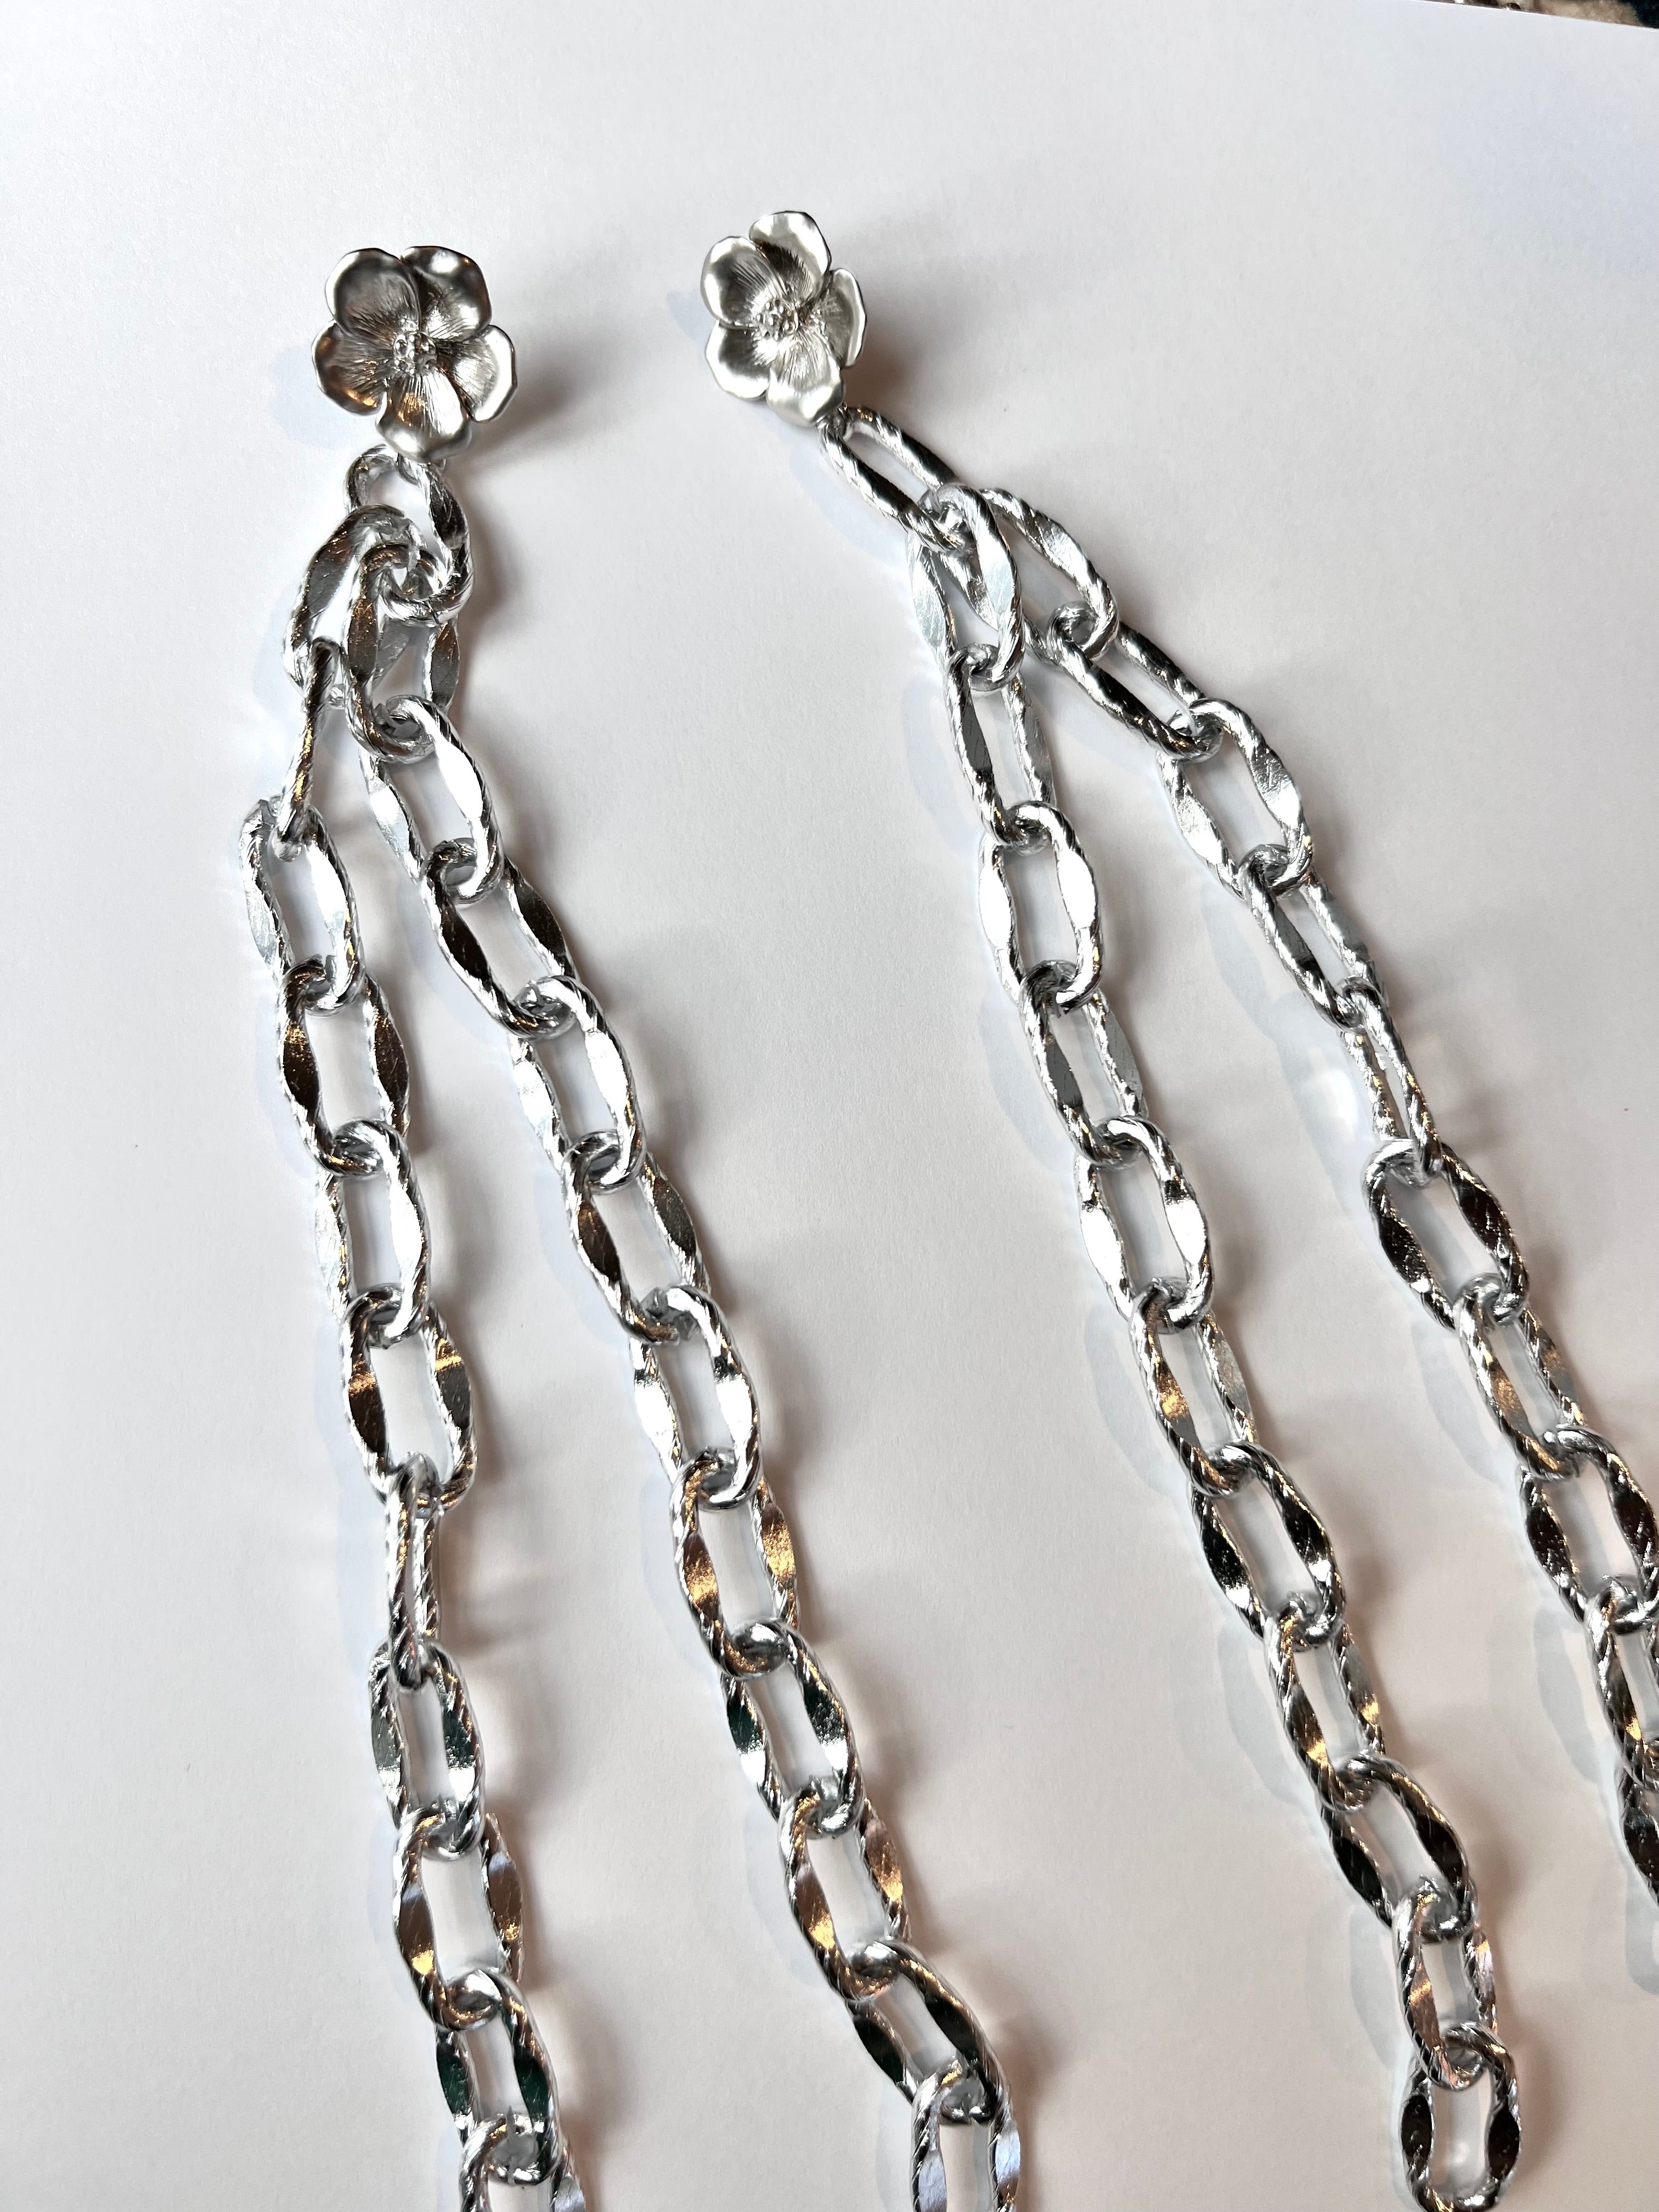 Silver Textured Chain with Flower Post Long Earrings